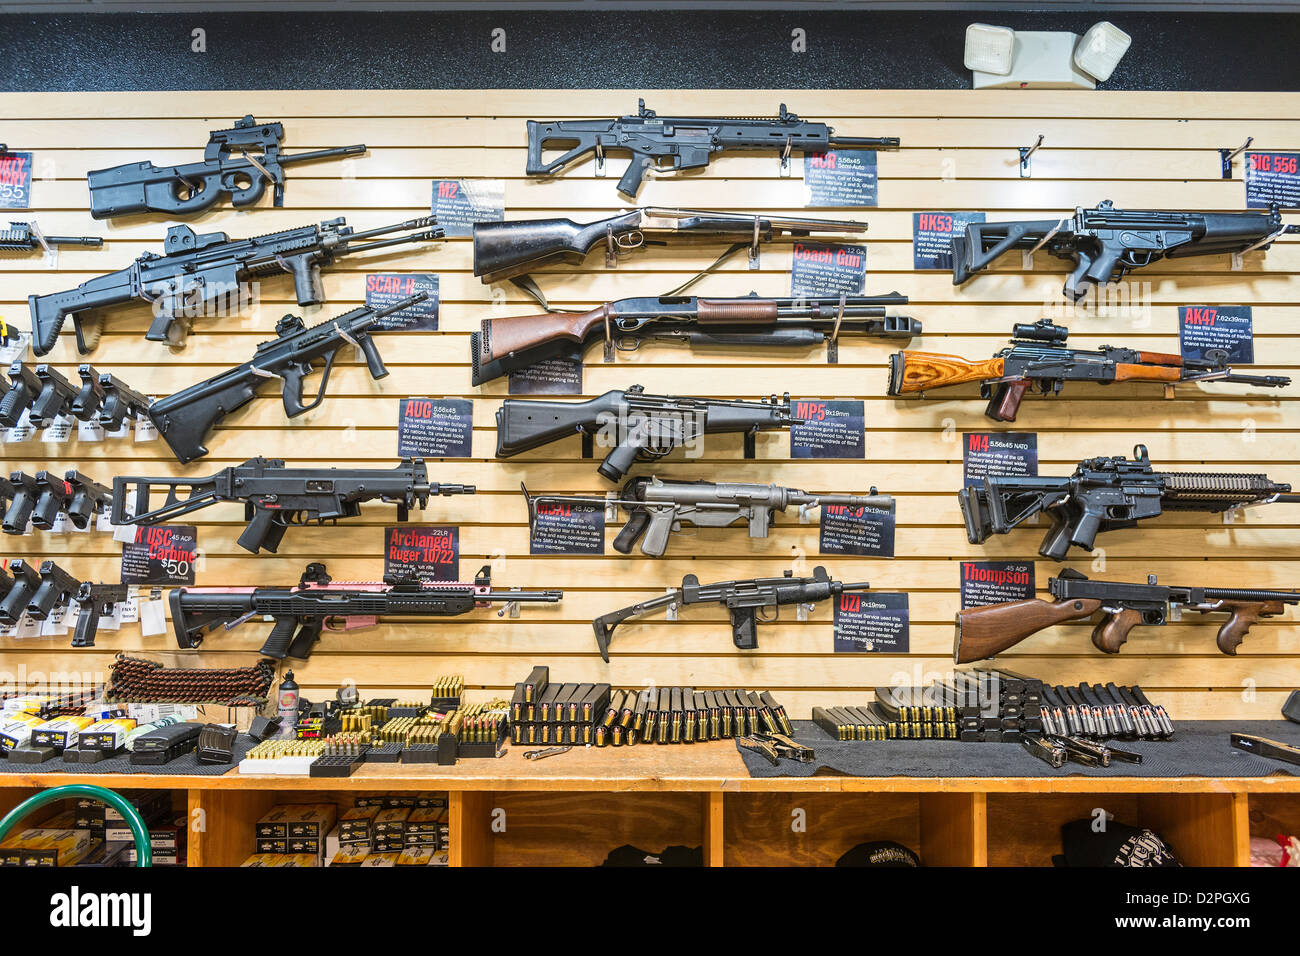 A large variety of guns, rifles, and weapons at a gun store. Stock Photo